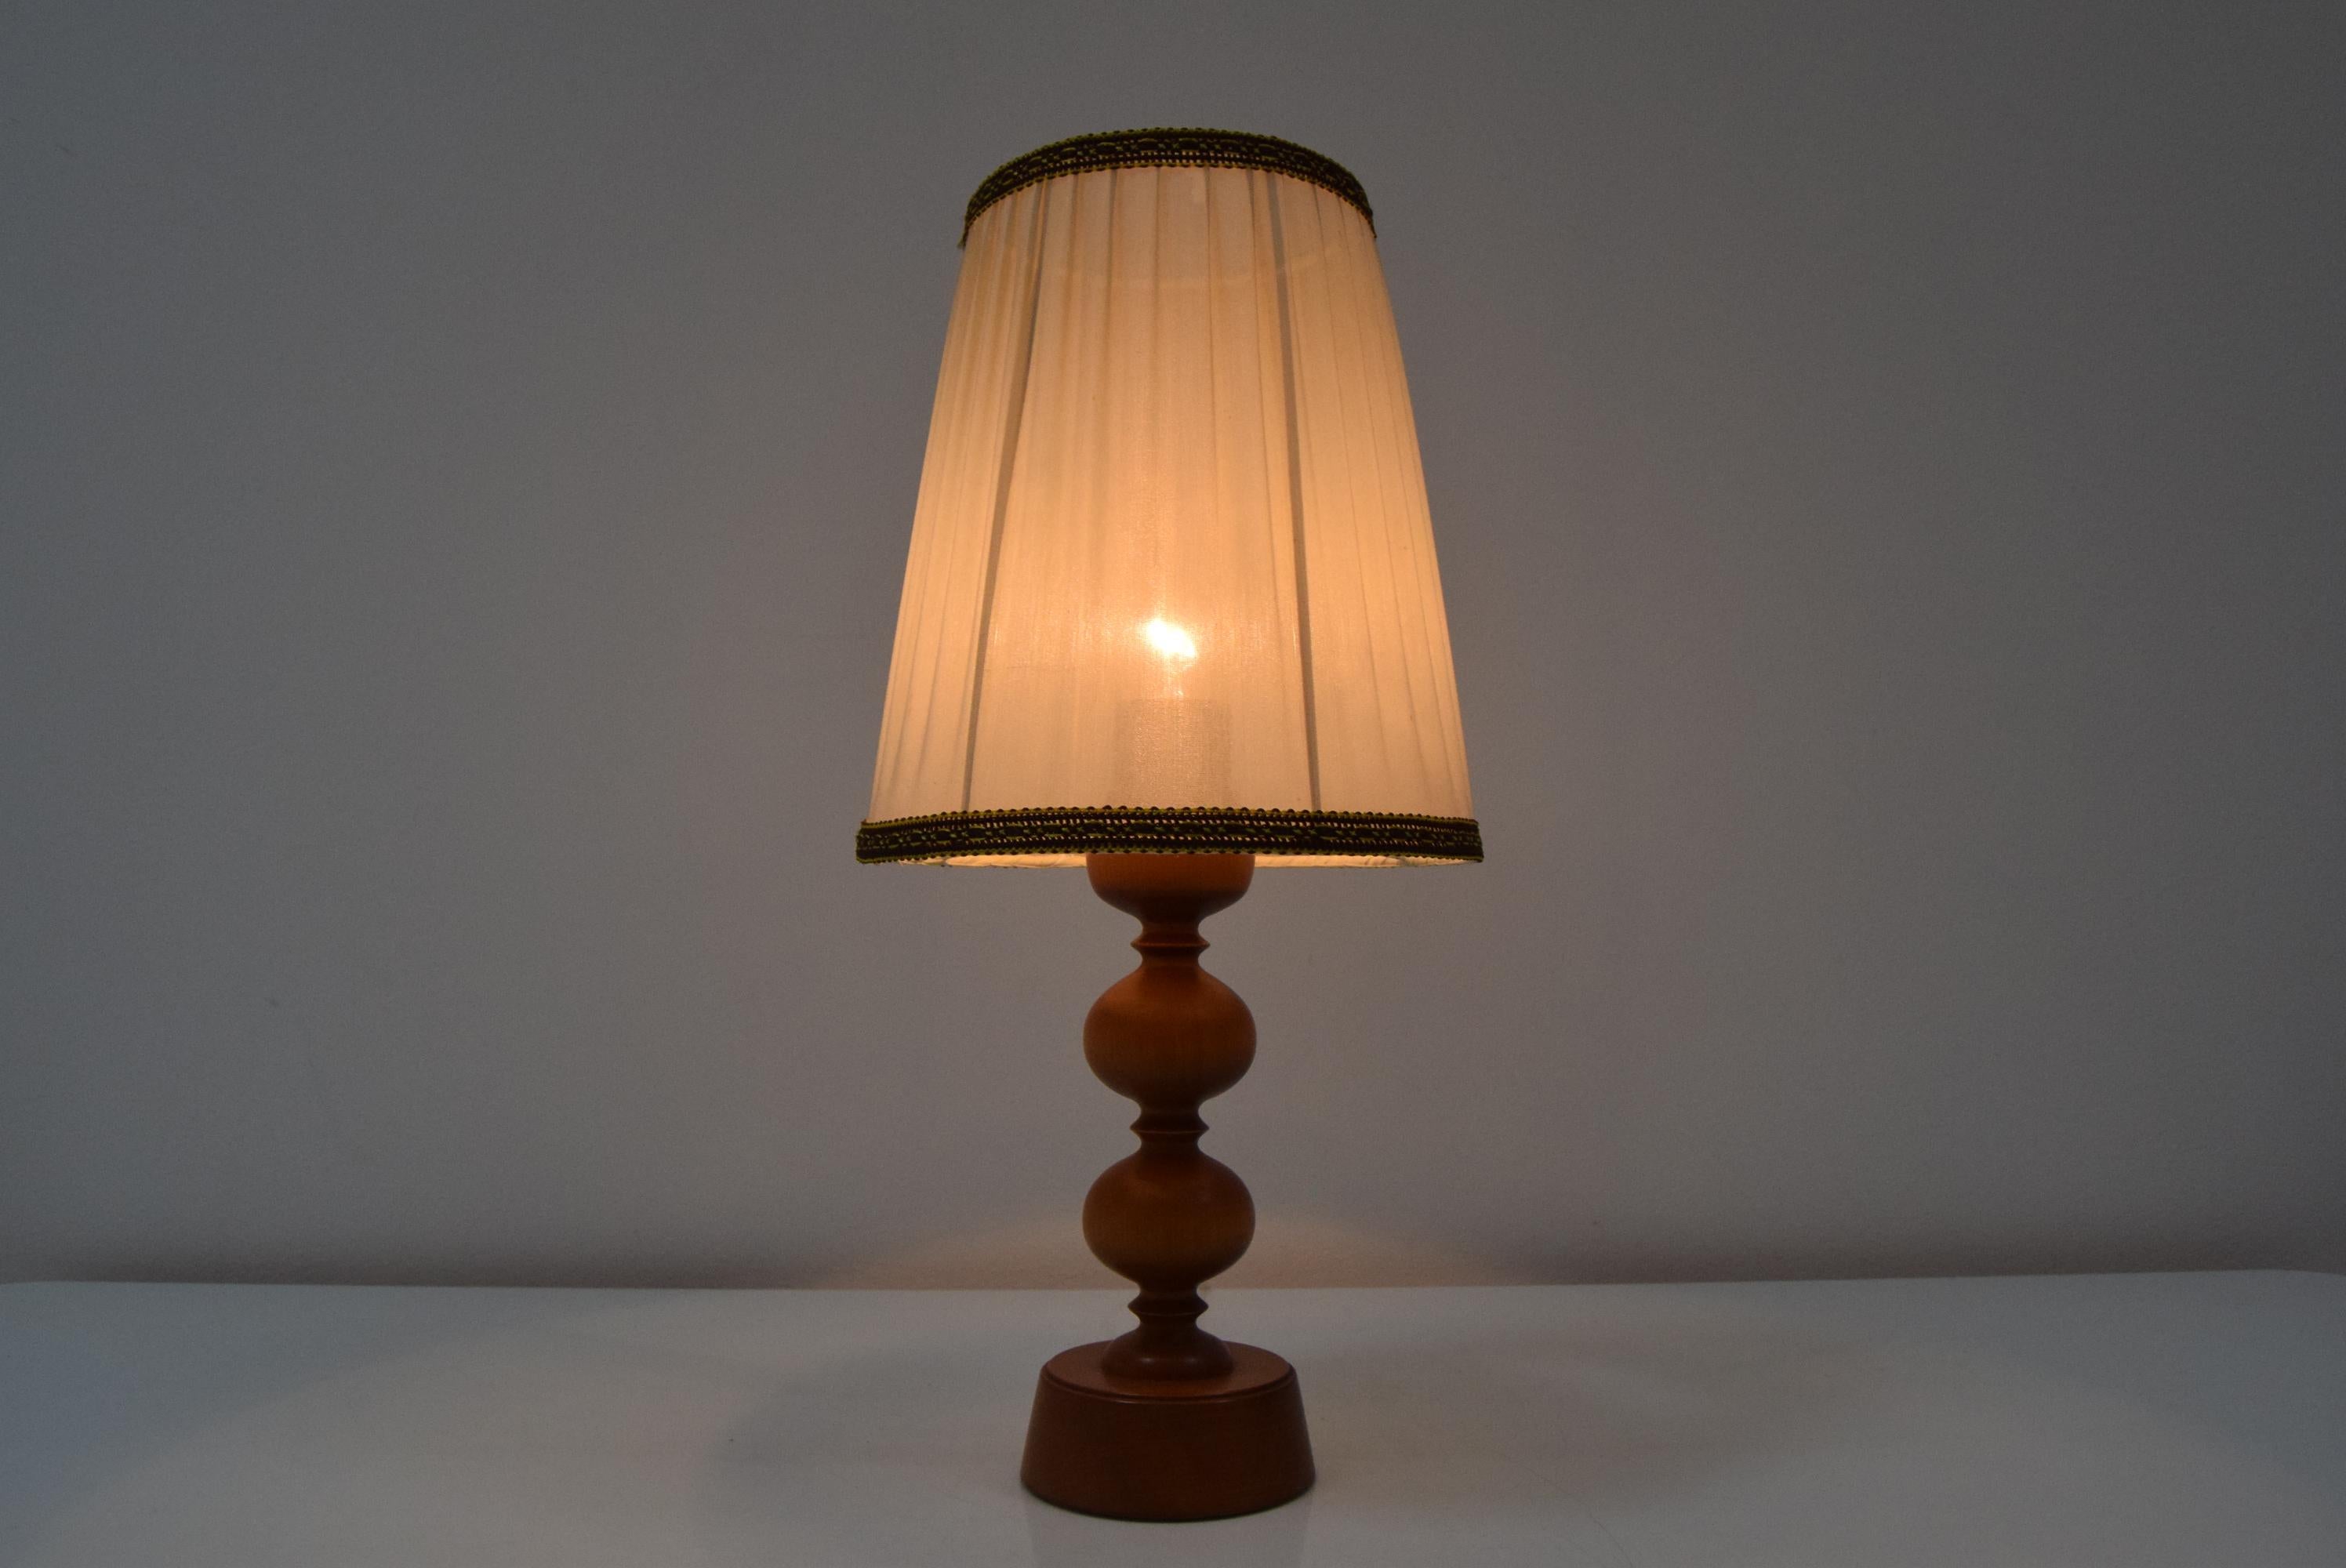 Made in Czechoslovakia
Made of Wood, Fabric
New cabling
1 x E27 or E26 bulb
The shade is slightly dirty
Re-polished
Good Original condition
US adapter included.